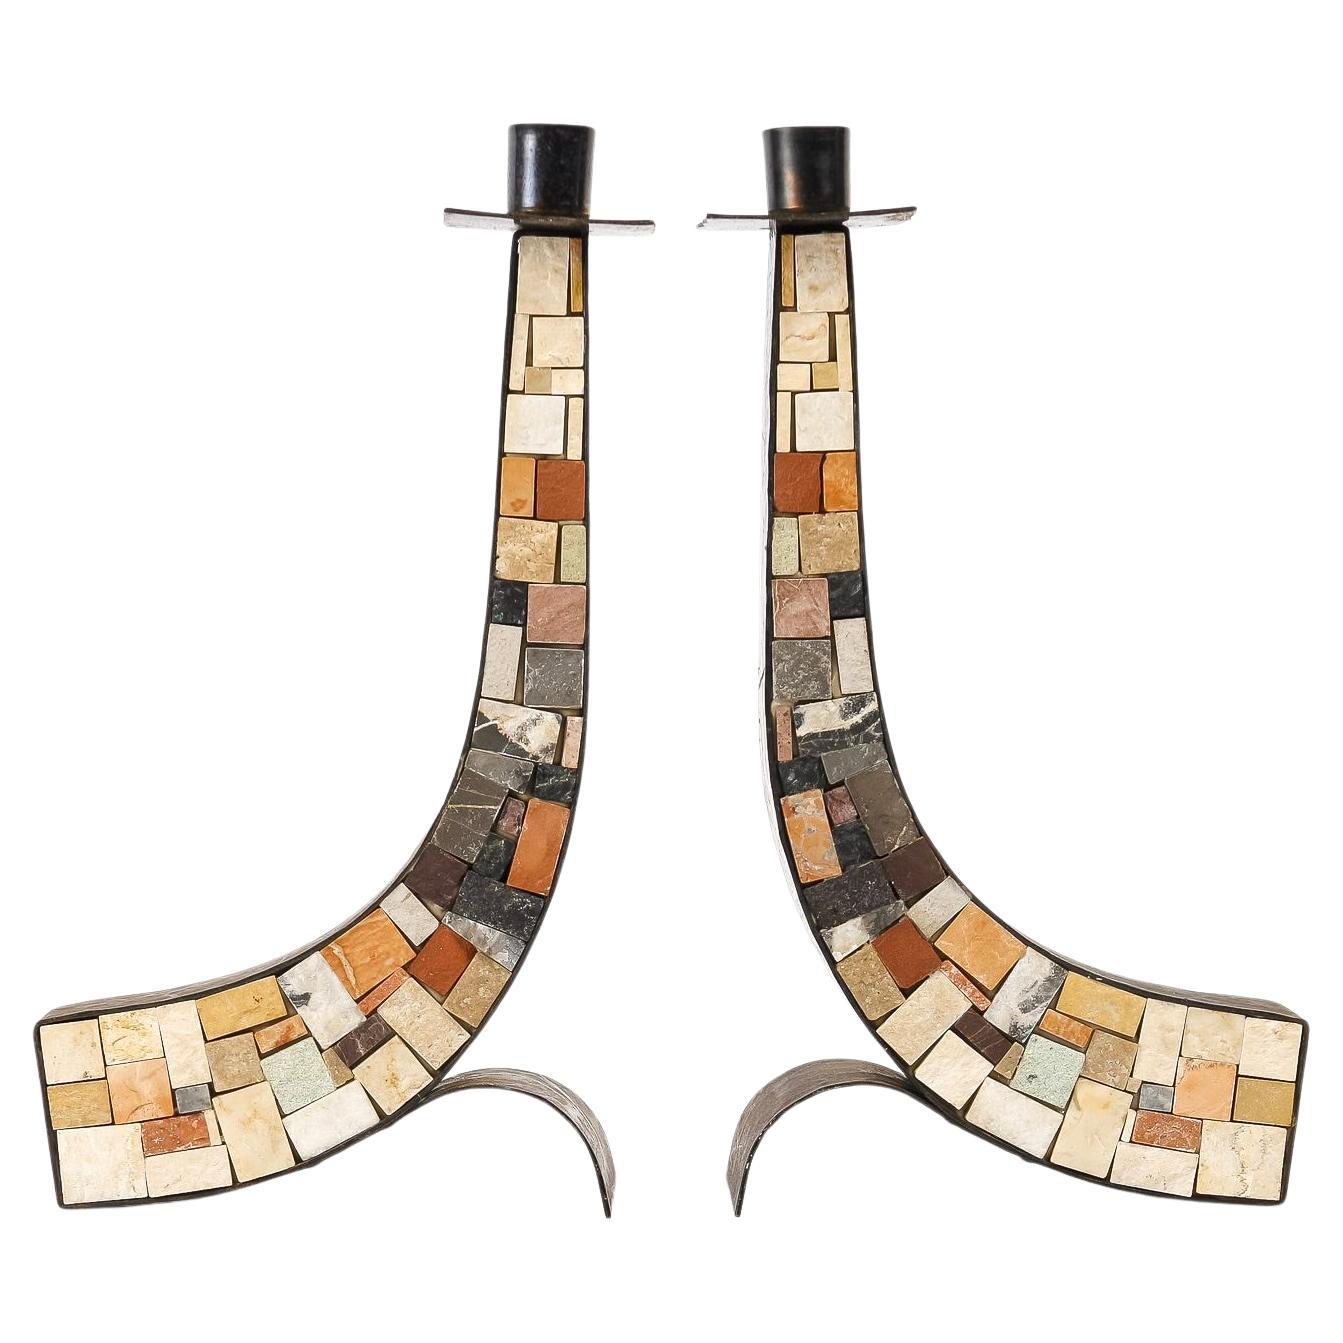 Original pair of mosaic candlesticks composed of different-colored stone forming a rising curve set in two hammered copper plates positioned on both outer faces and held to the ground by a foot forming a rounded copper curve.
On the upper part, the